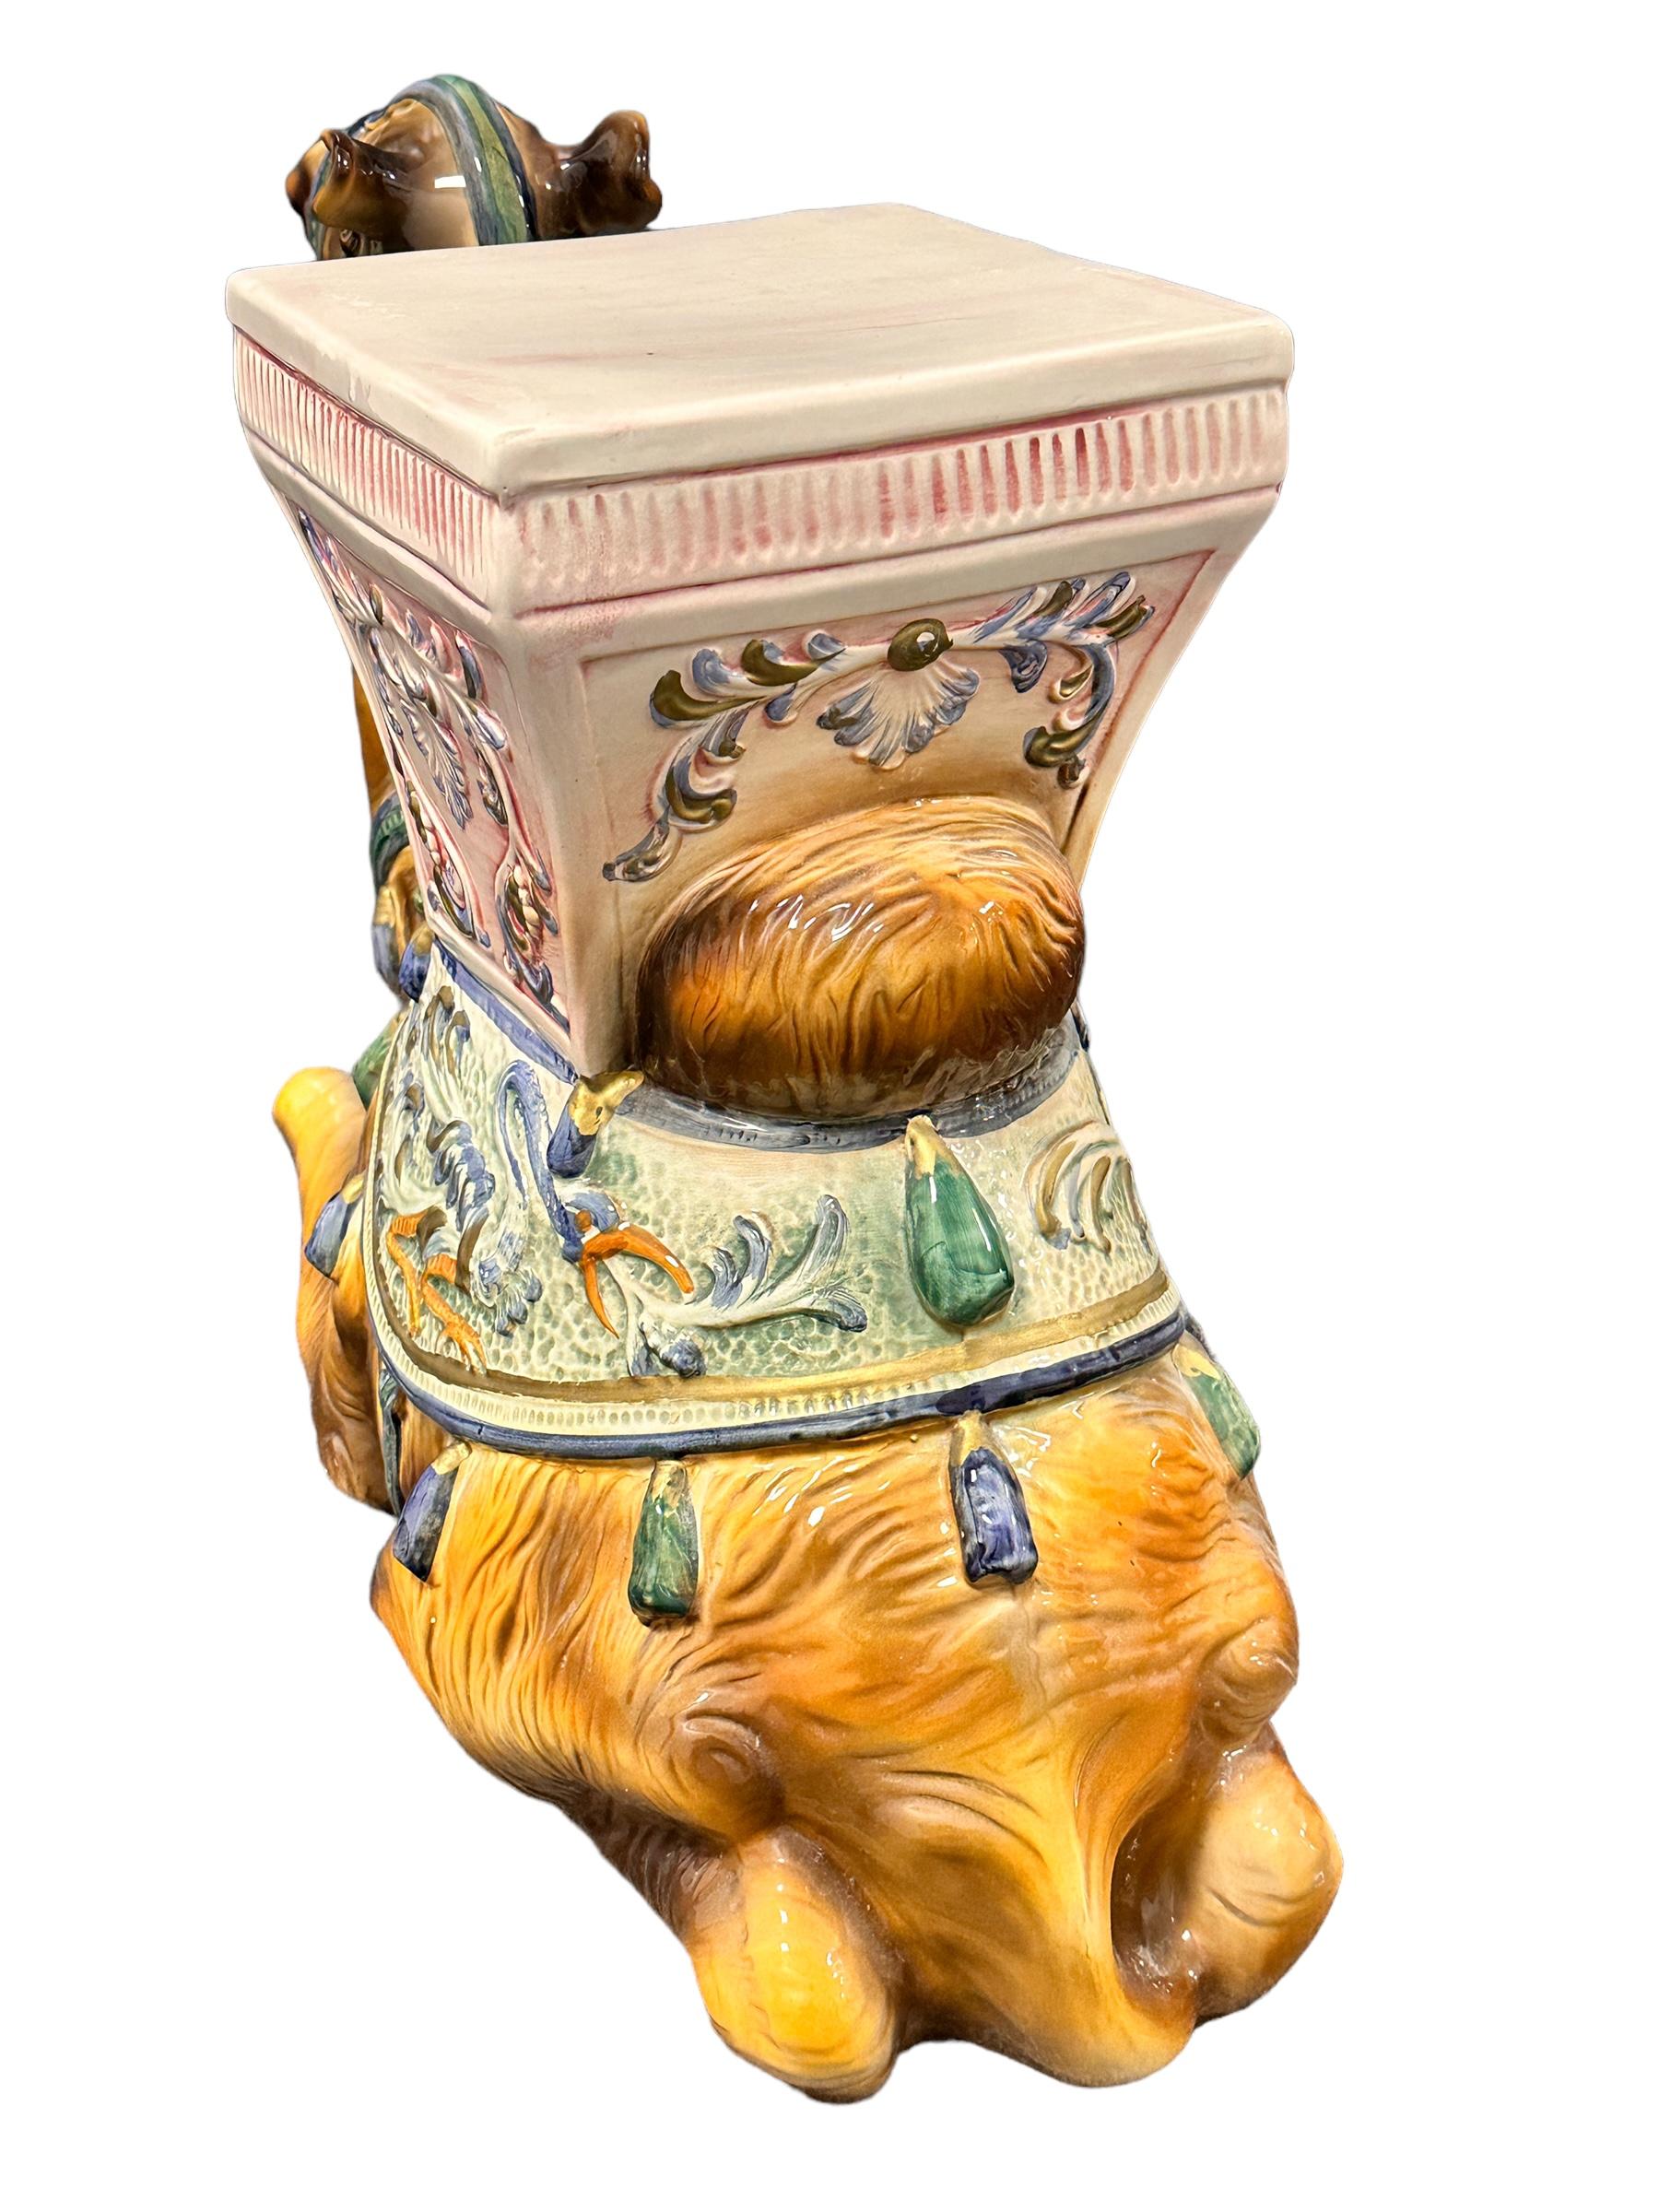 Stunning Ceramic Hollywood Regency Camel Garden Stool or Side Table, Italy 1960s For Sale 1